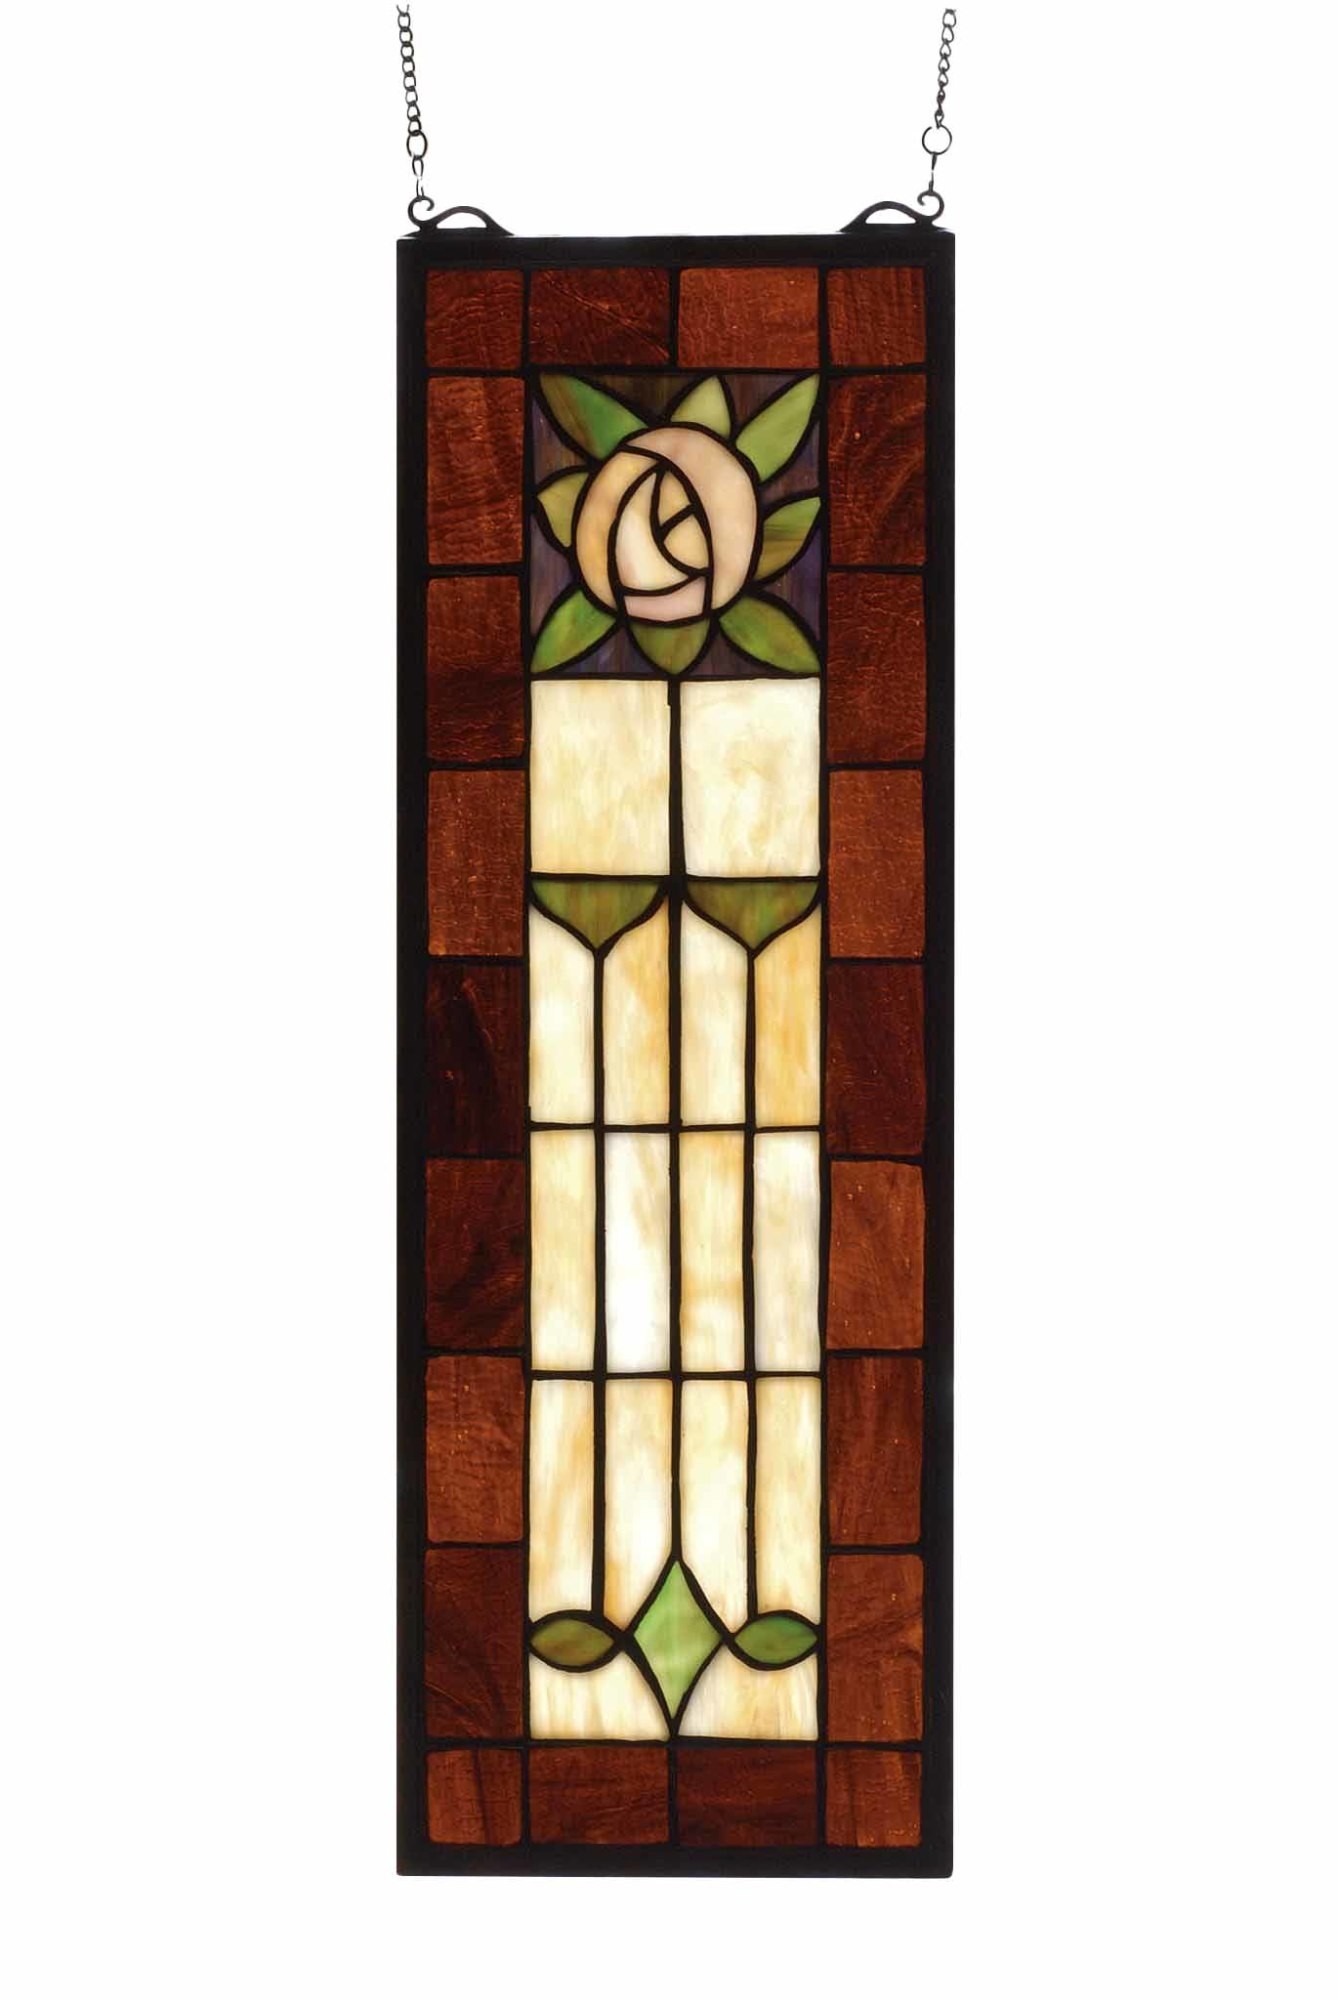 Pasadena Rose Stained Glass Window